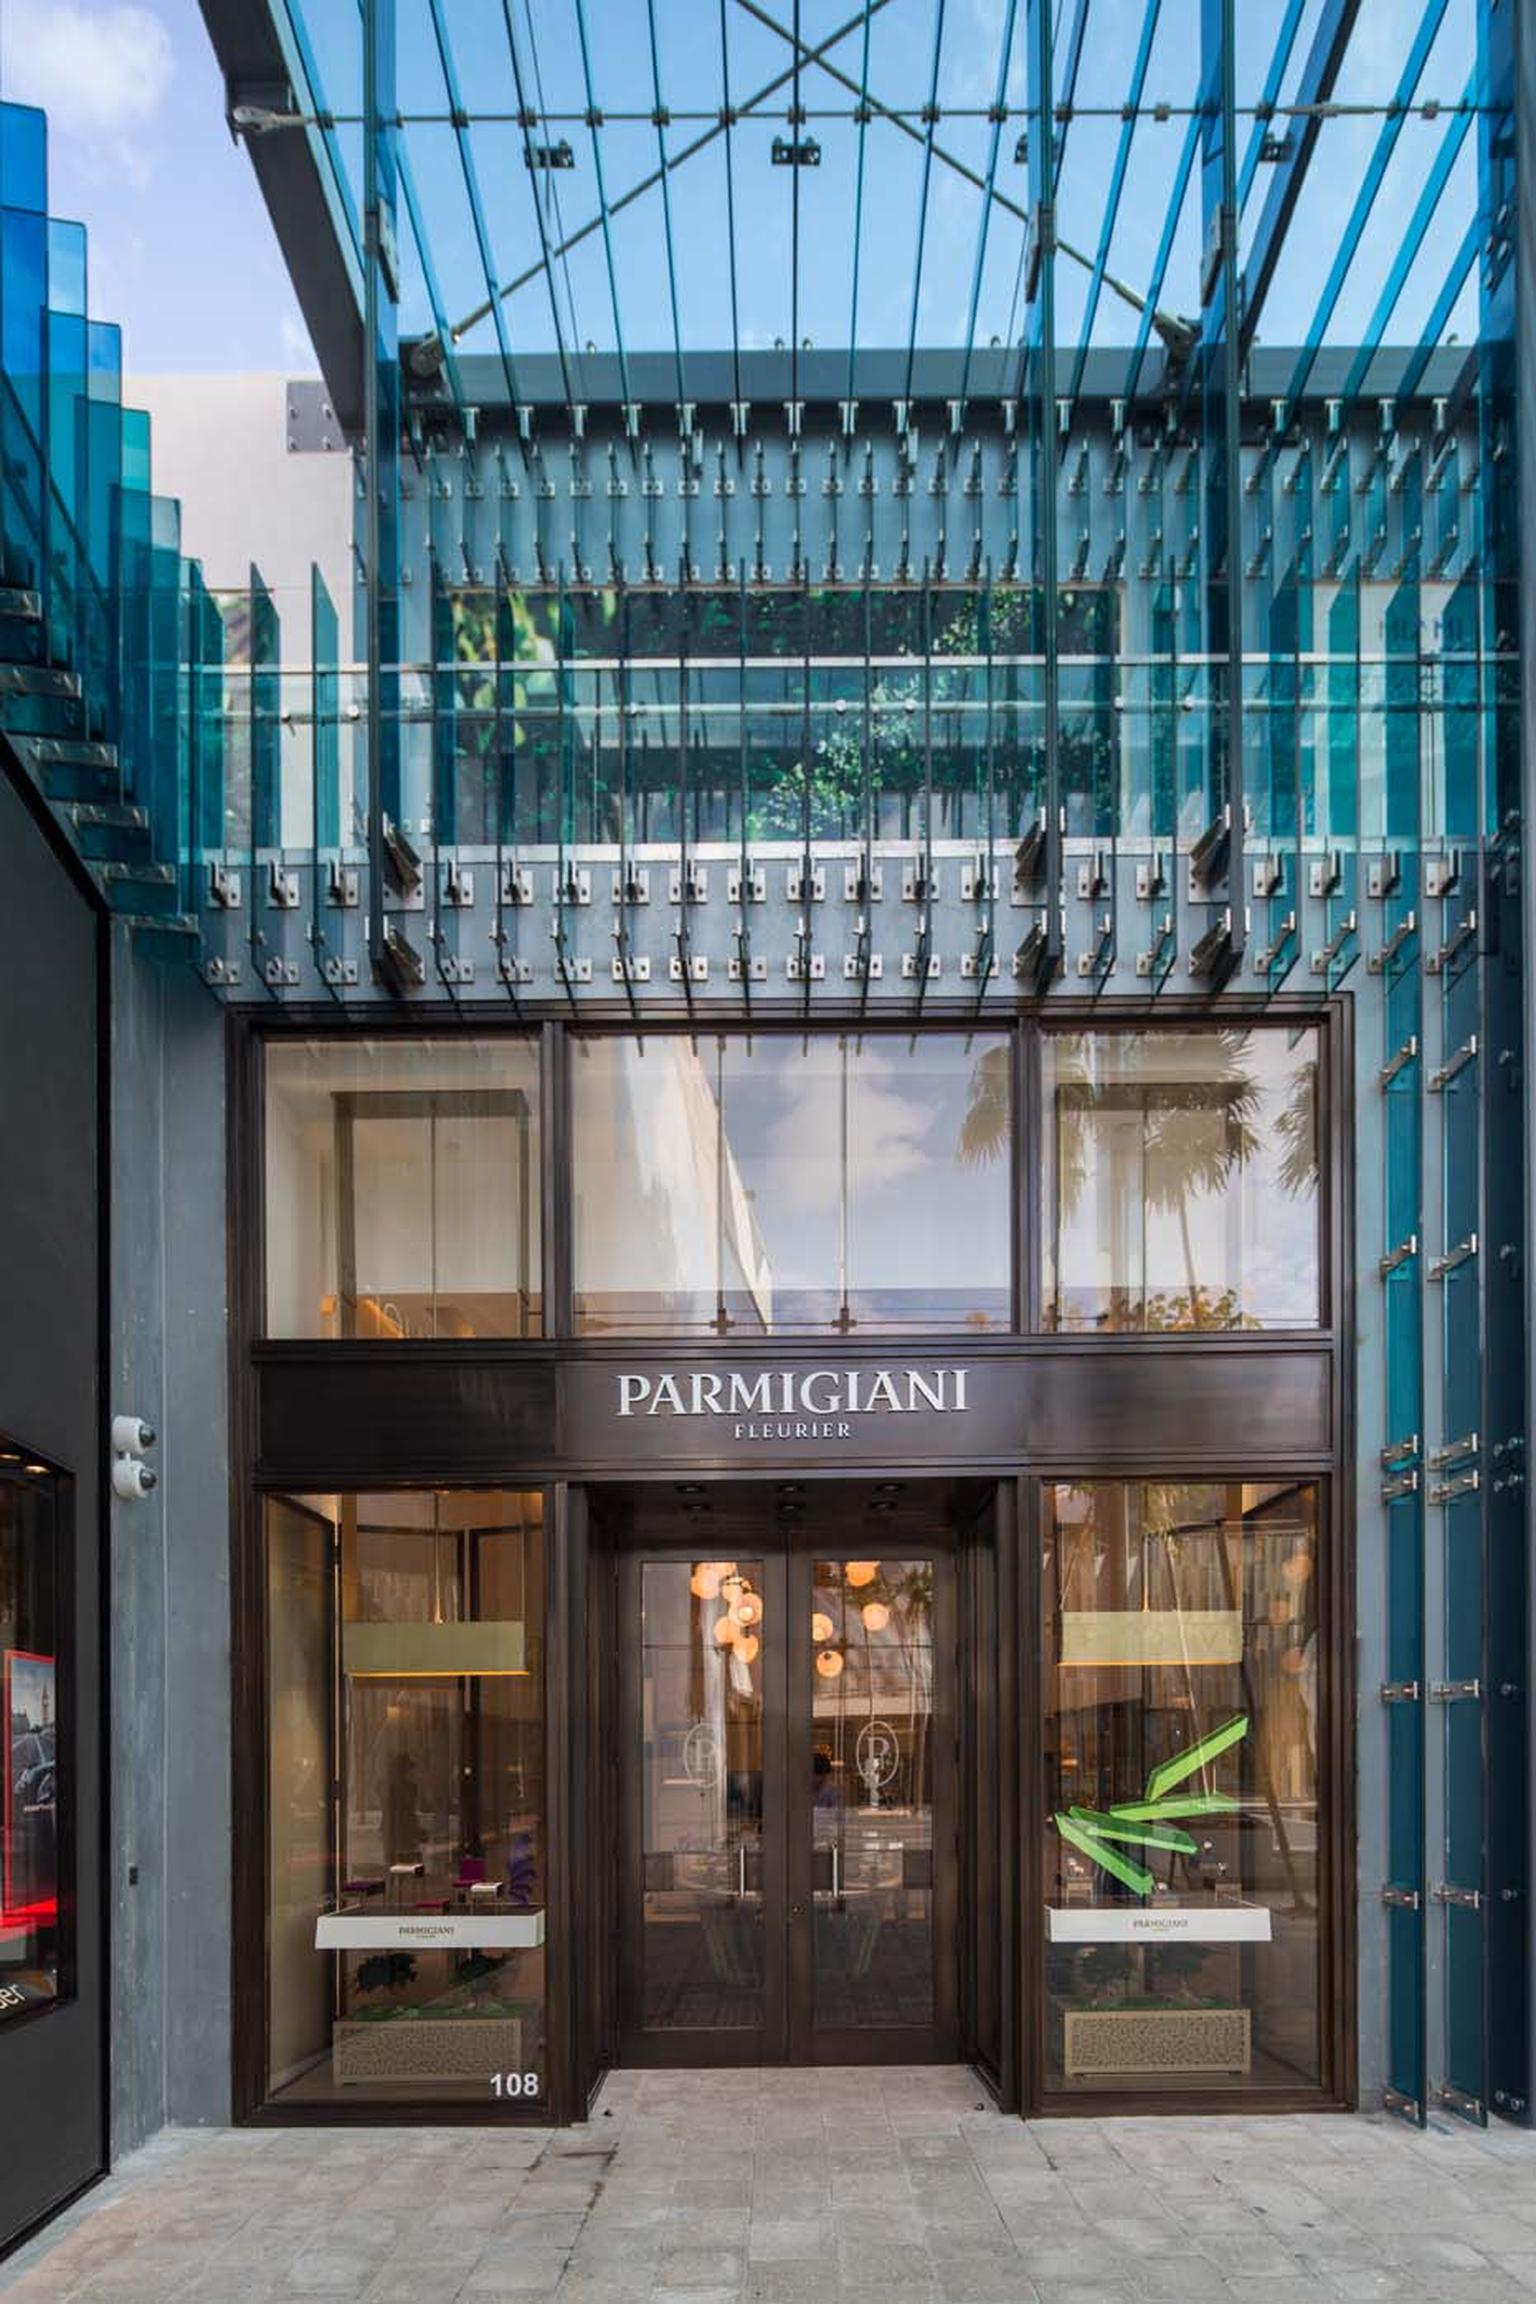 Watchmaker Parmigiani Fleurier is one of the most recent brands to open a boutique within the Miami Design District.